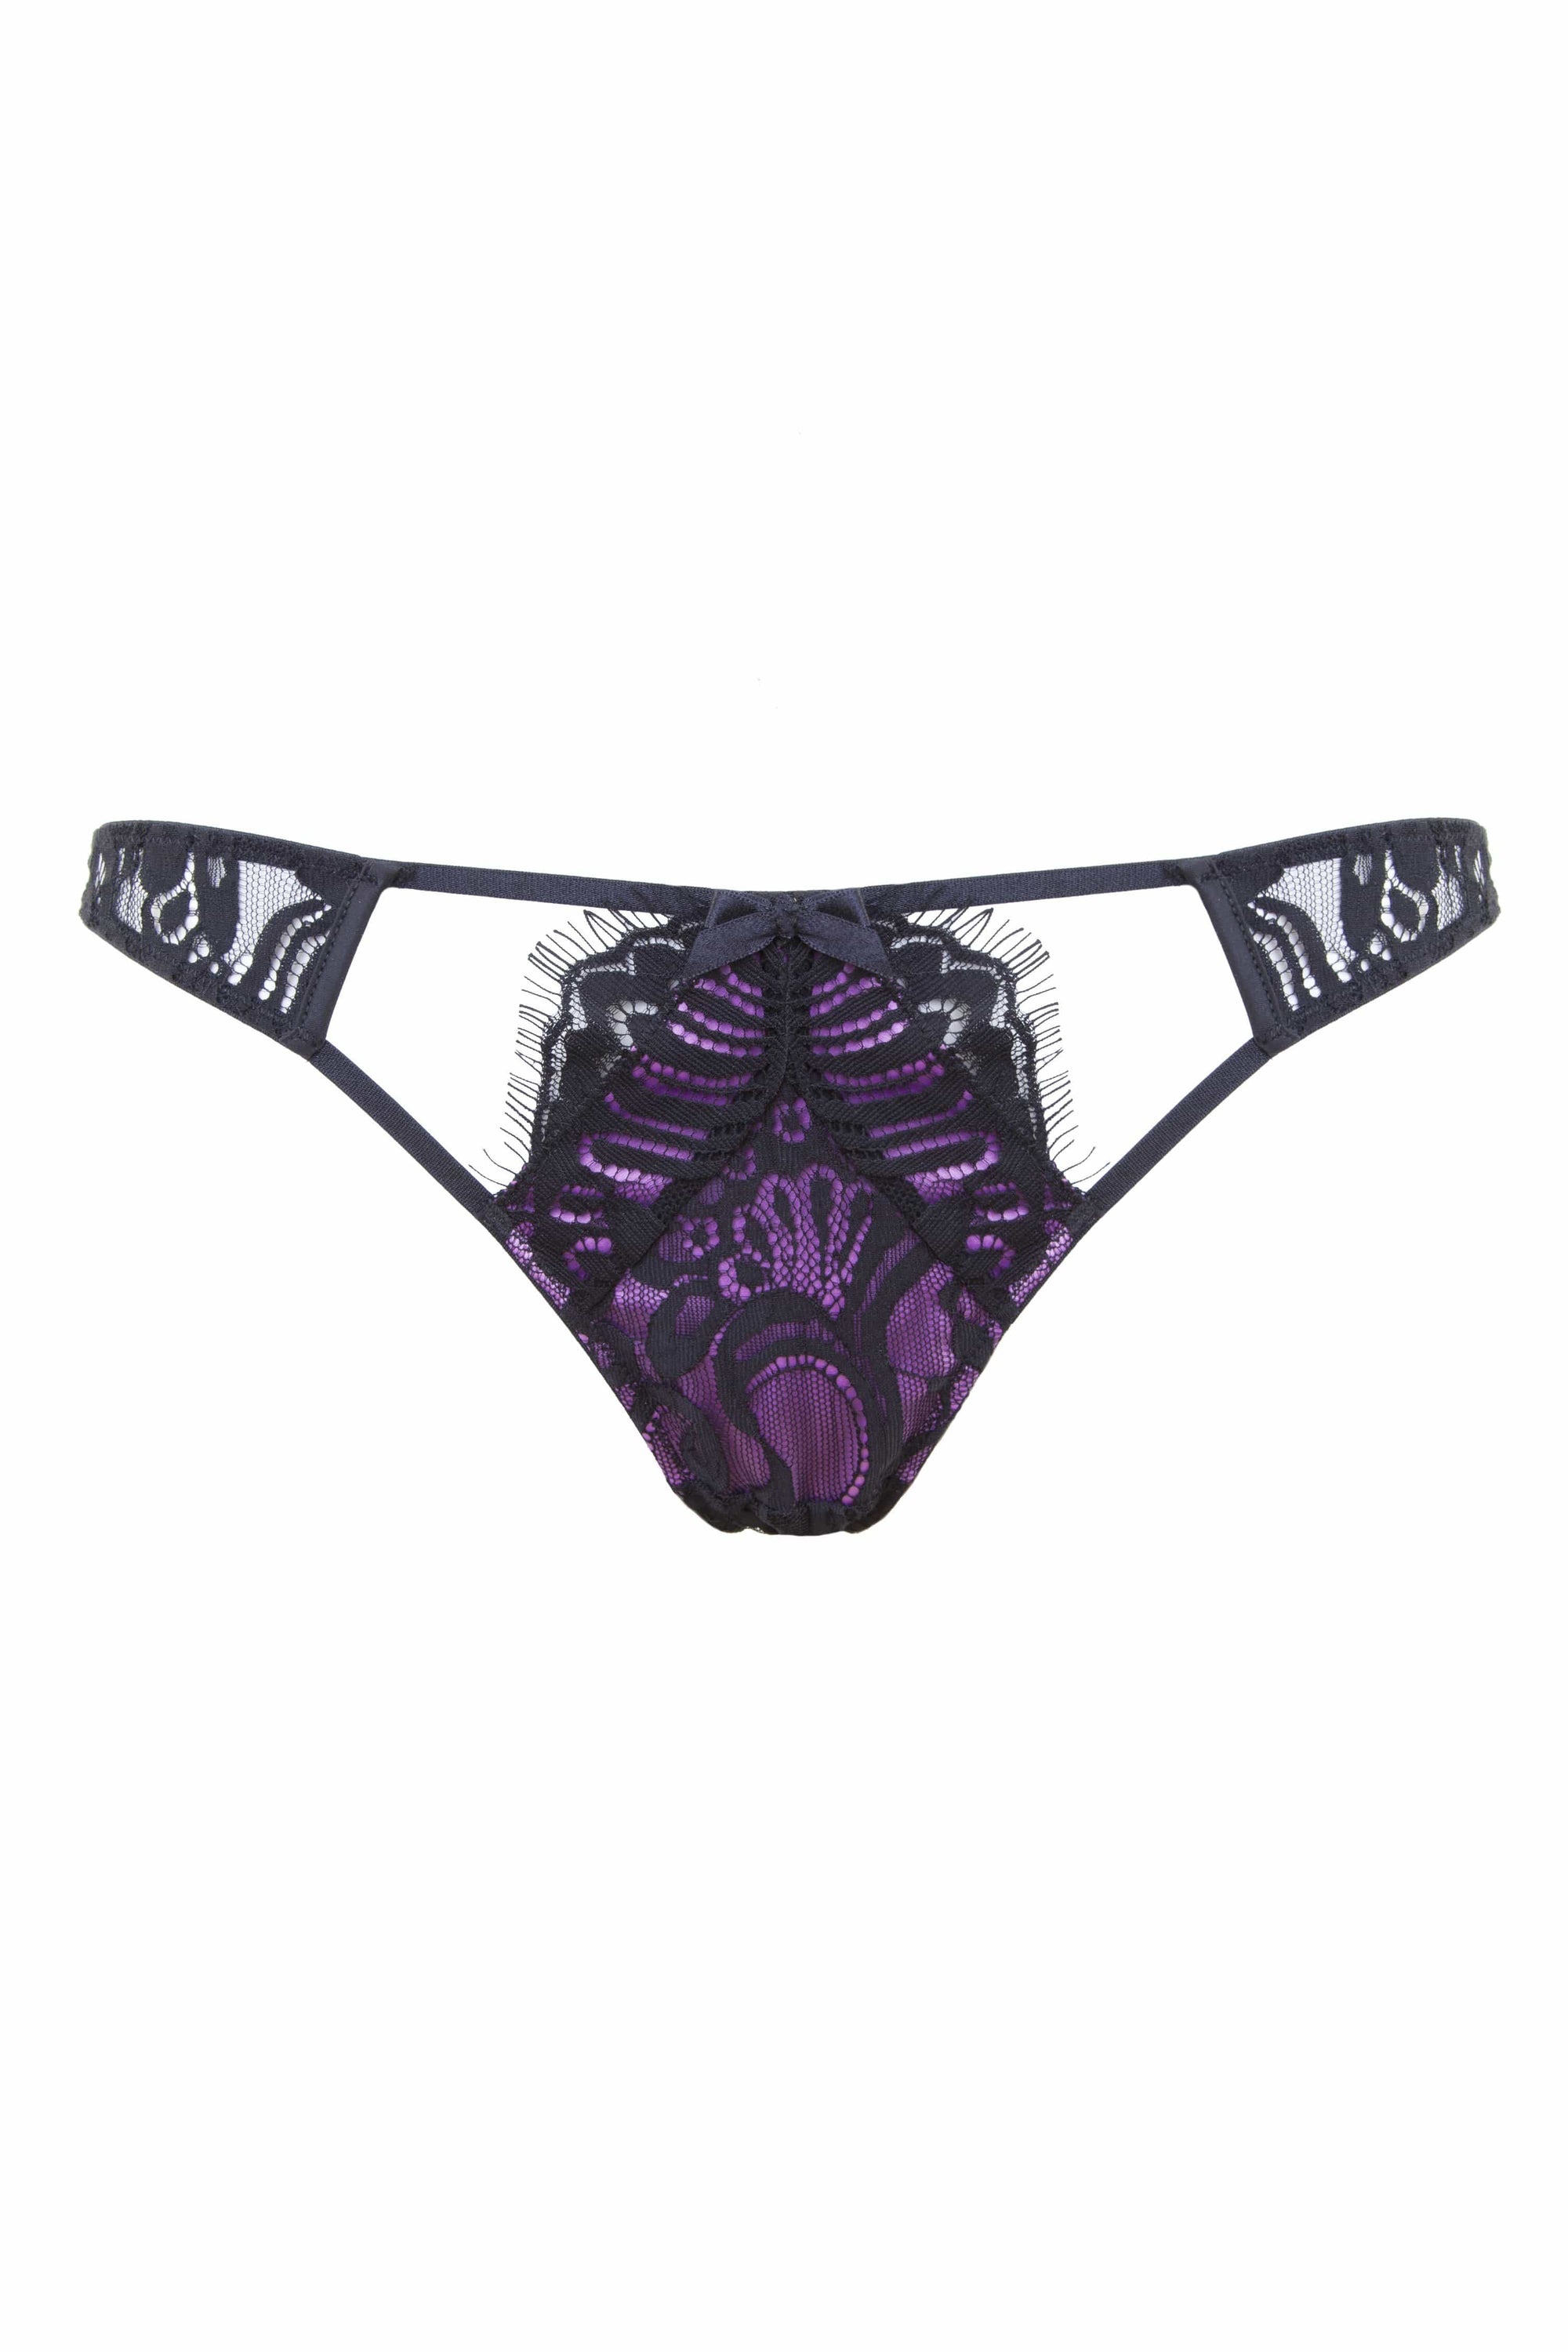 Candy Ultra Violet/Black Brief Candy Curve